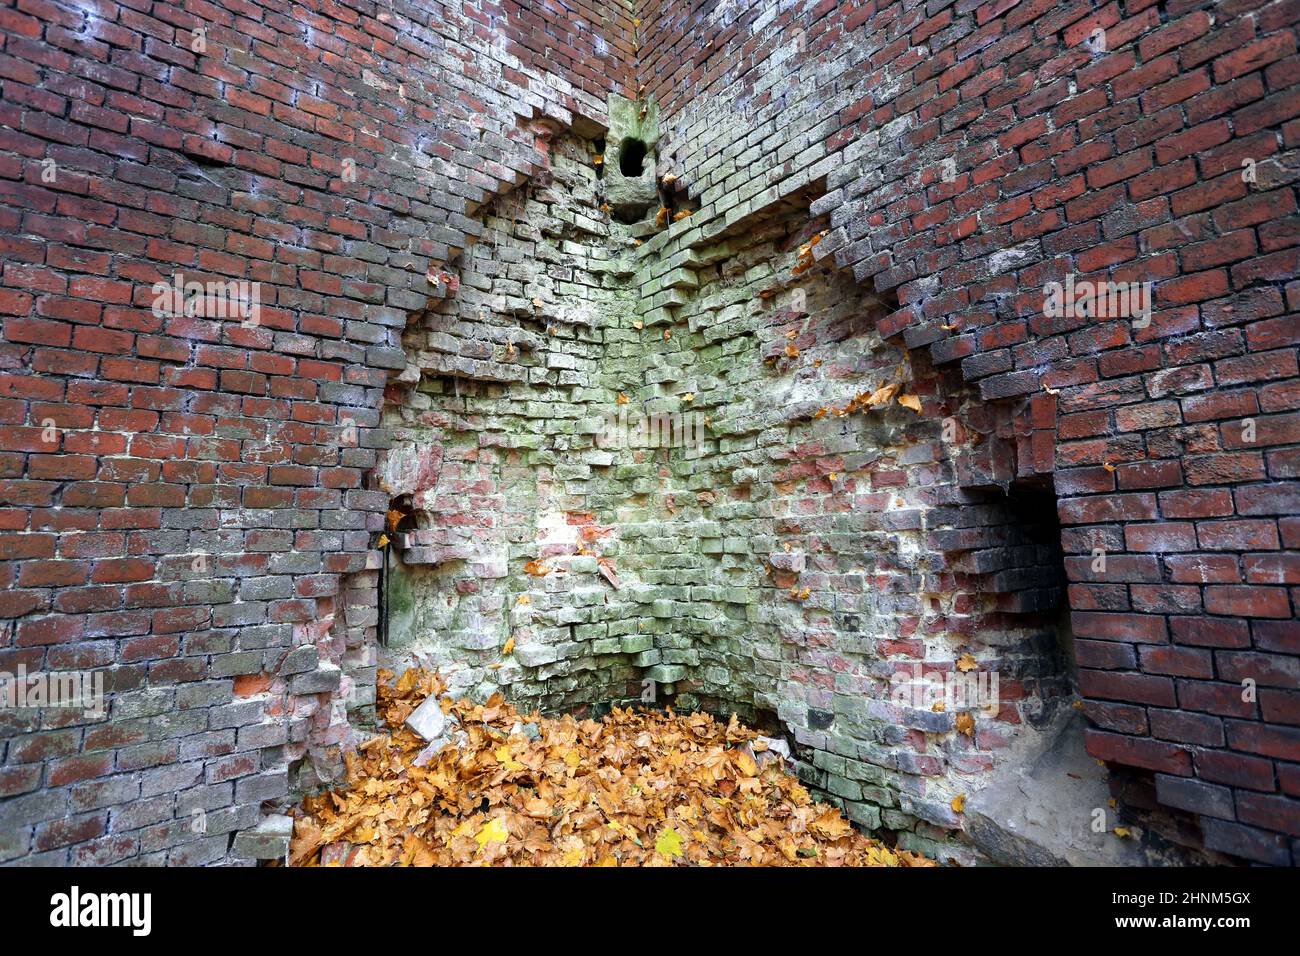 Cracow. Krakow. Poland. Multi-layeredi brickwork wall structure visible in damaged wall. Bastion III 'Kleparz', standard reduit fort, part of the 'Twi Stock Photo